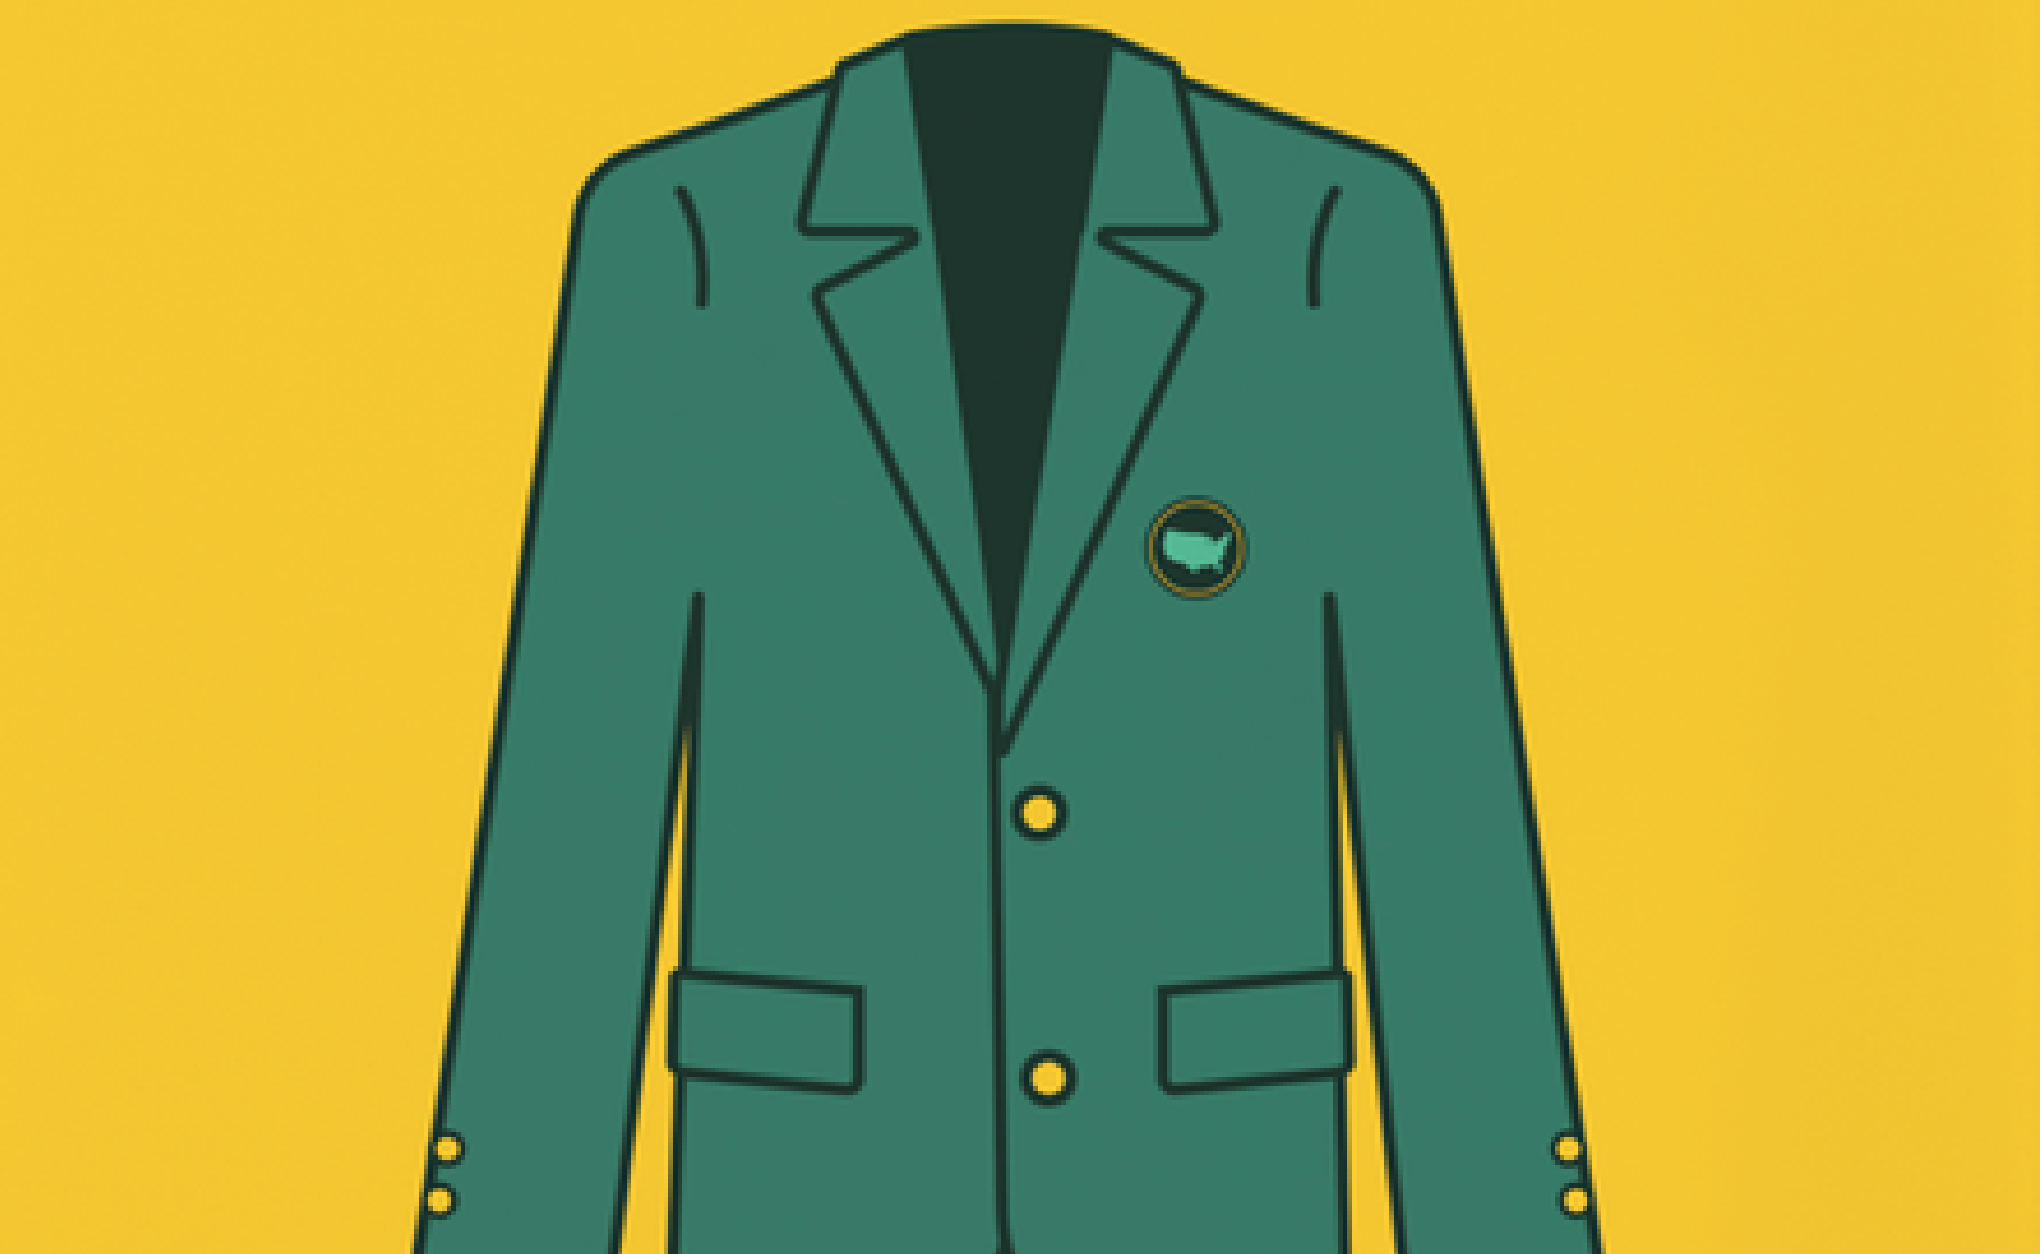 The Green and Gold of the Masters Jacket Are a Federally Registered